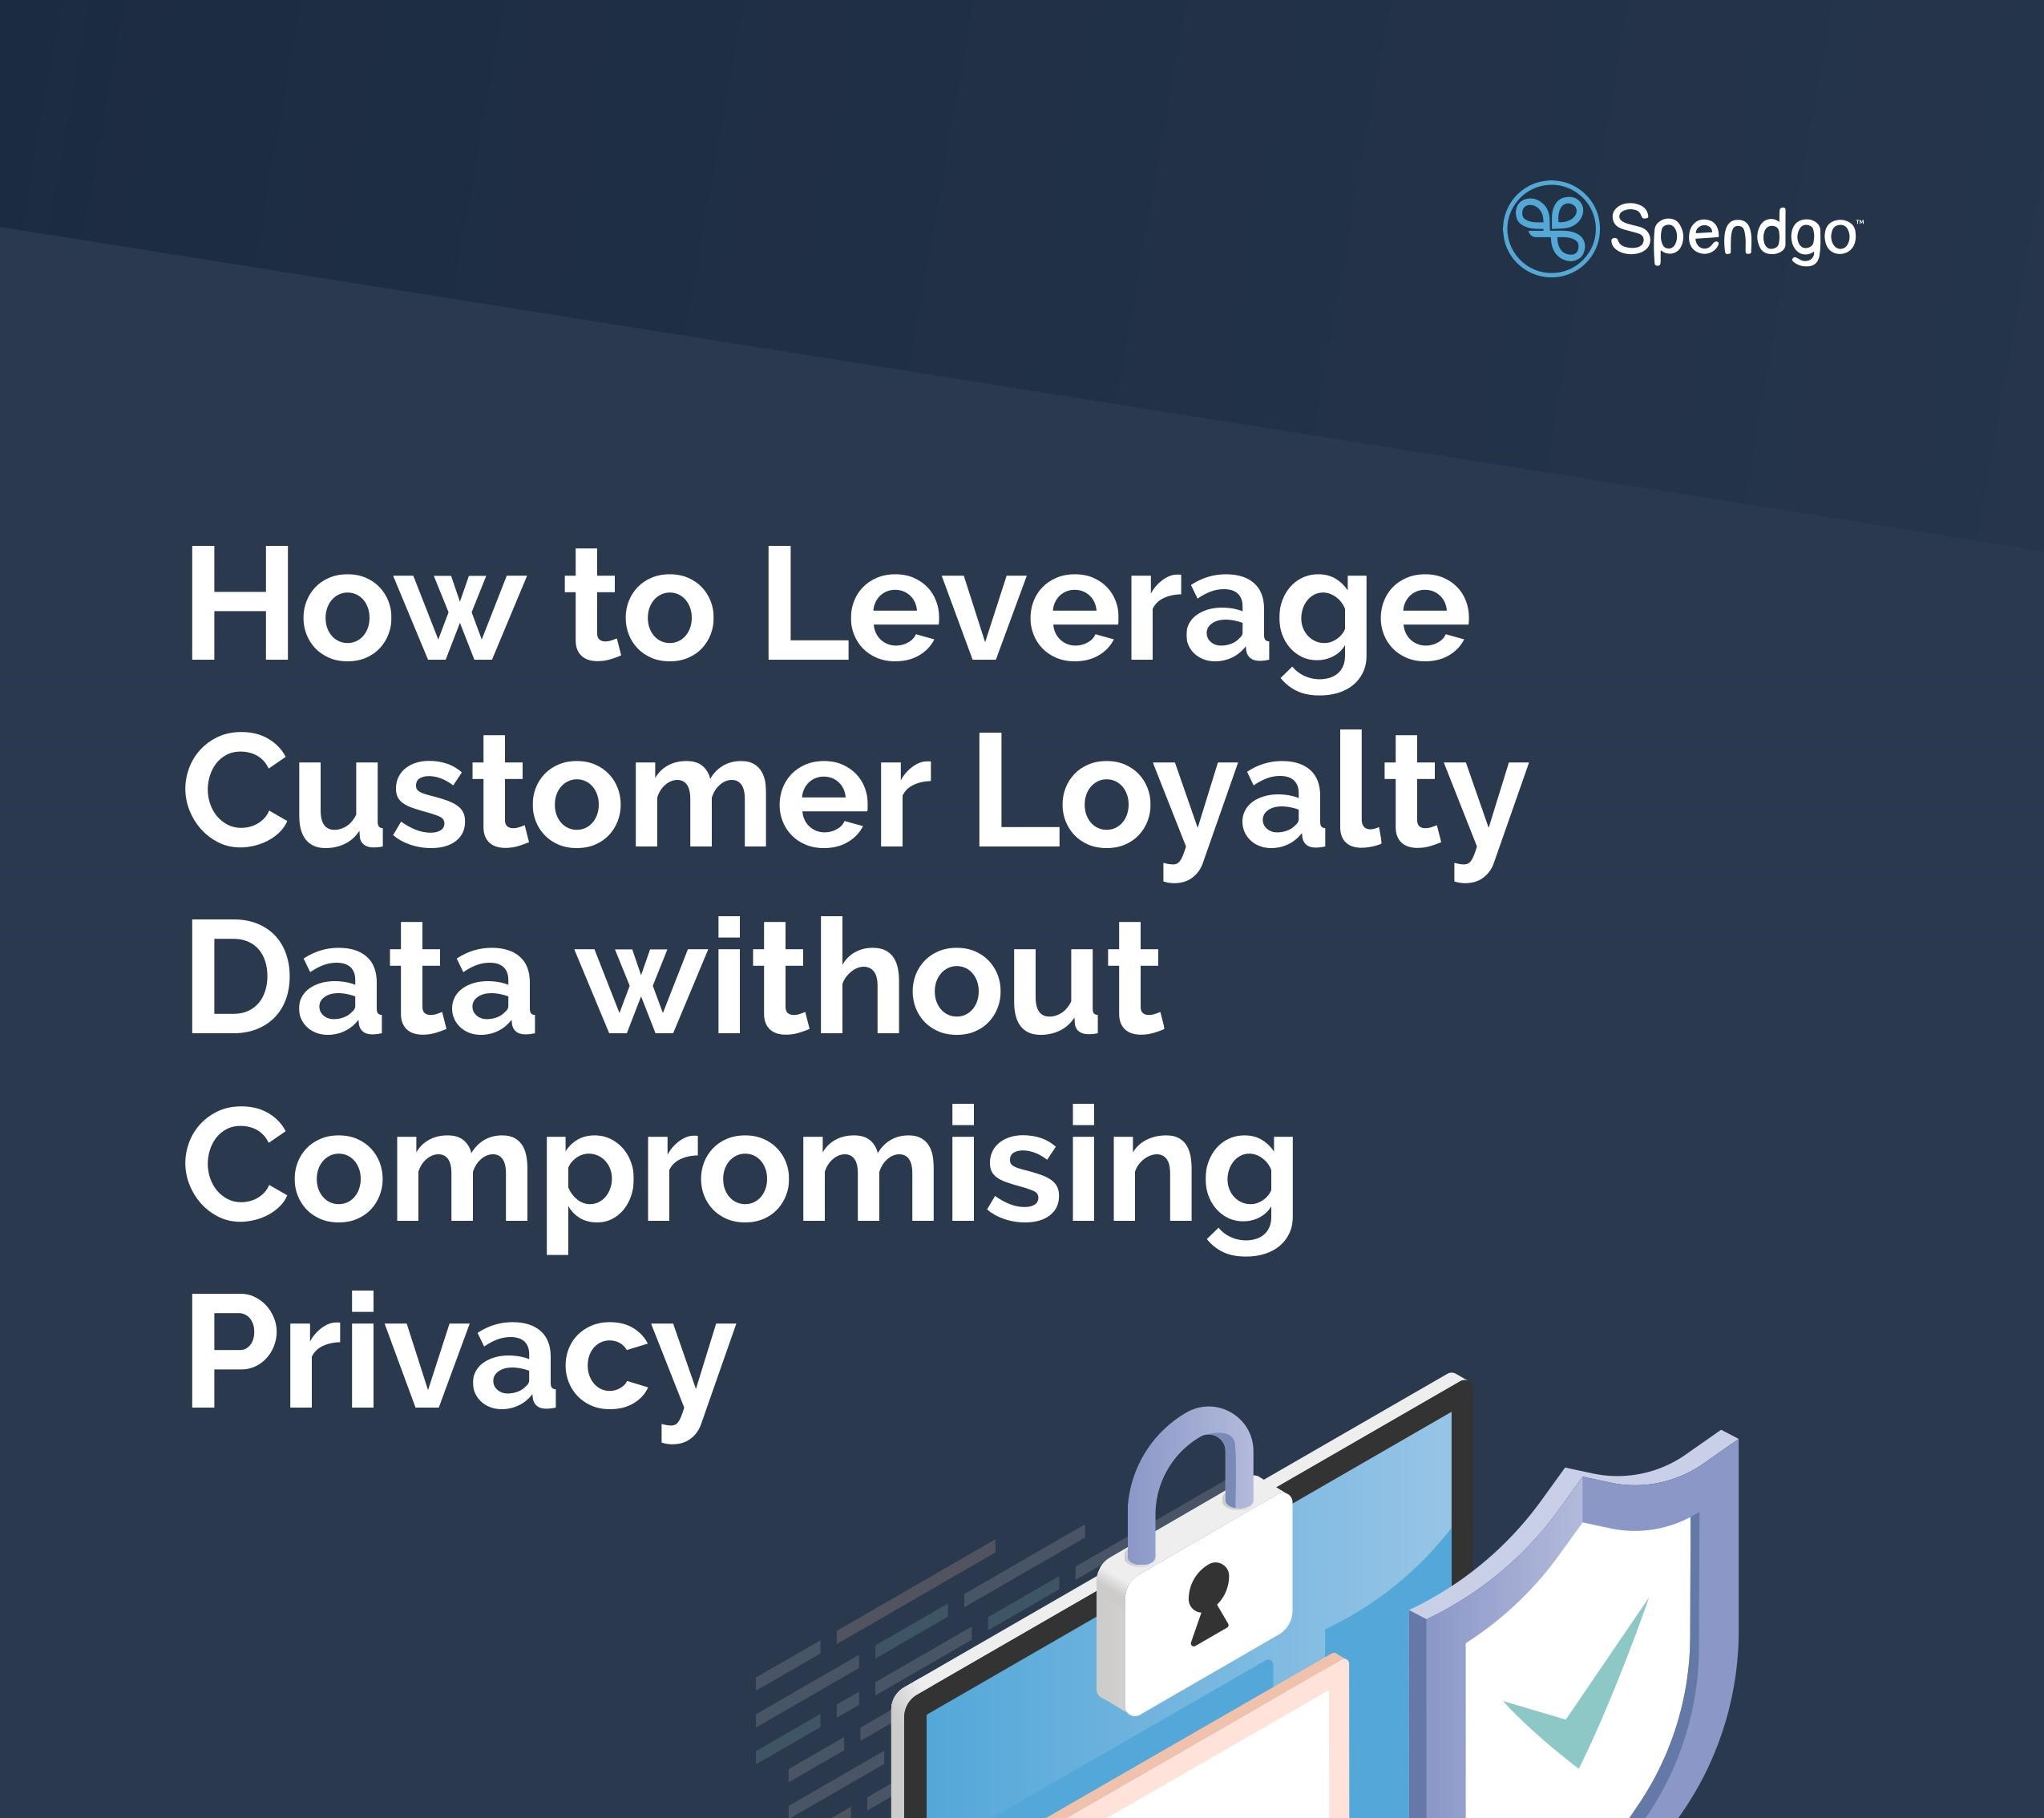 How to Leverage Customer Loyalty Data without Compromising Privacy